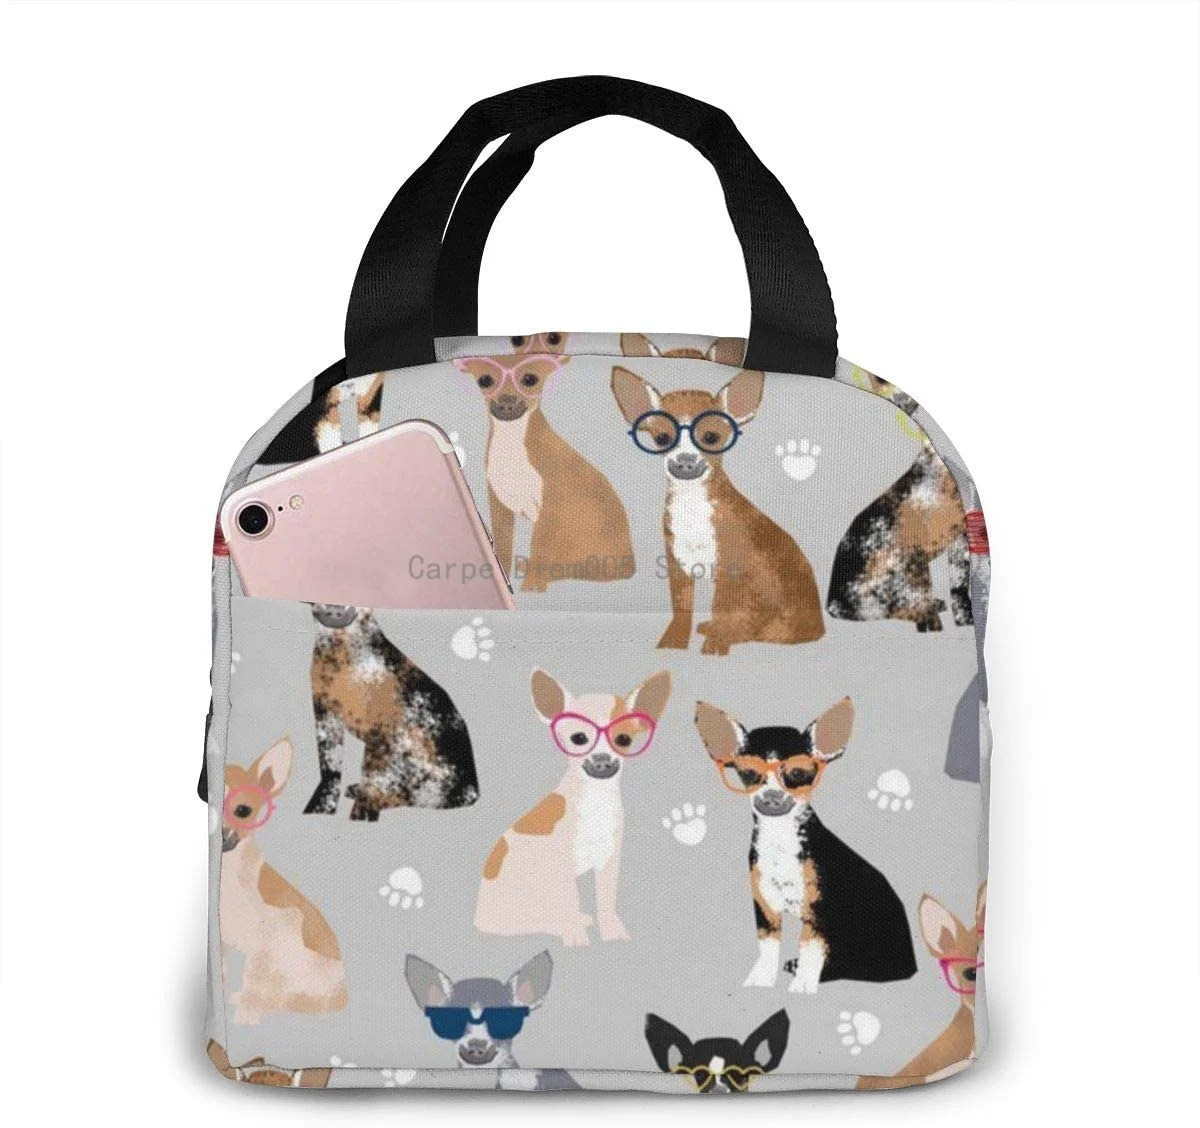 Unisex Food Warmer Bag Chihuahua Dog Lunch Bag Reusable Lunch Box Lunch Cooler Tote